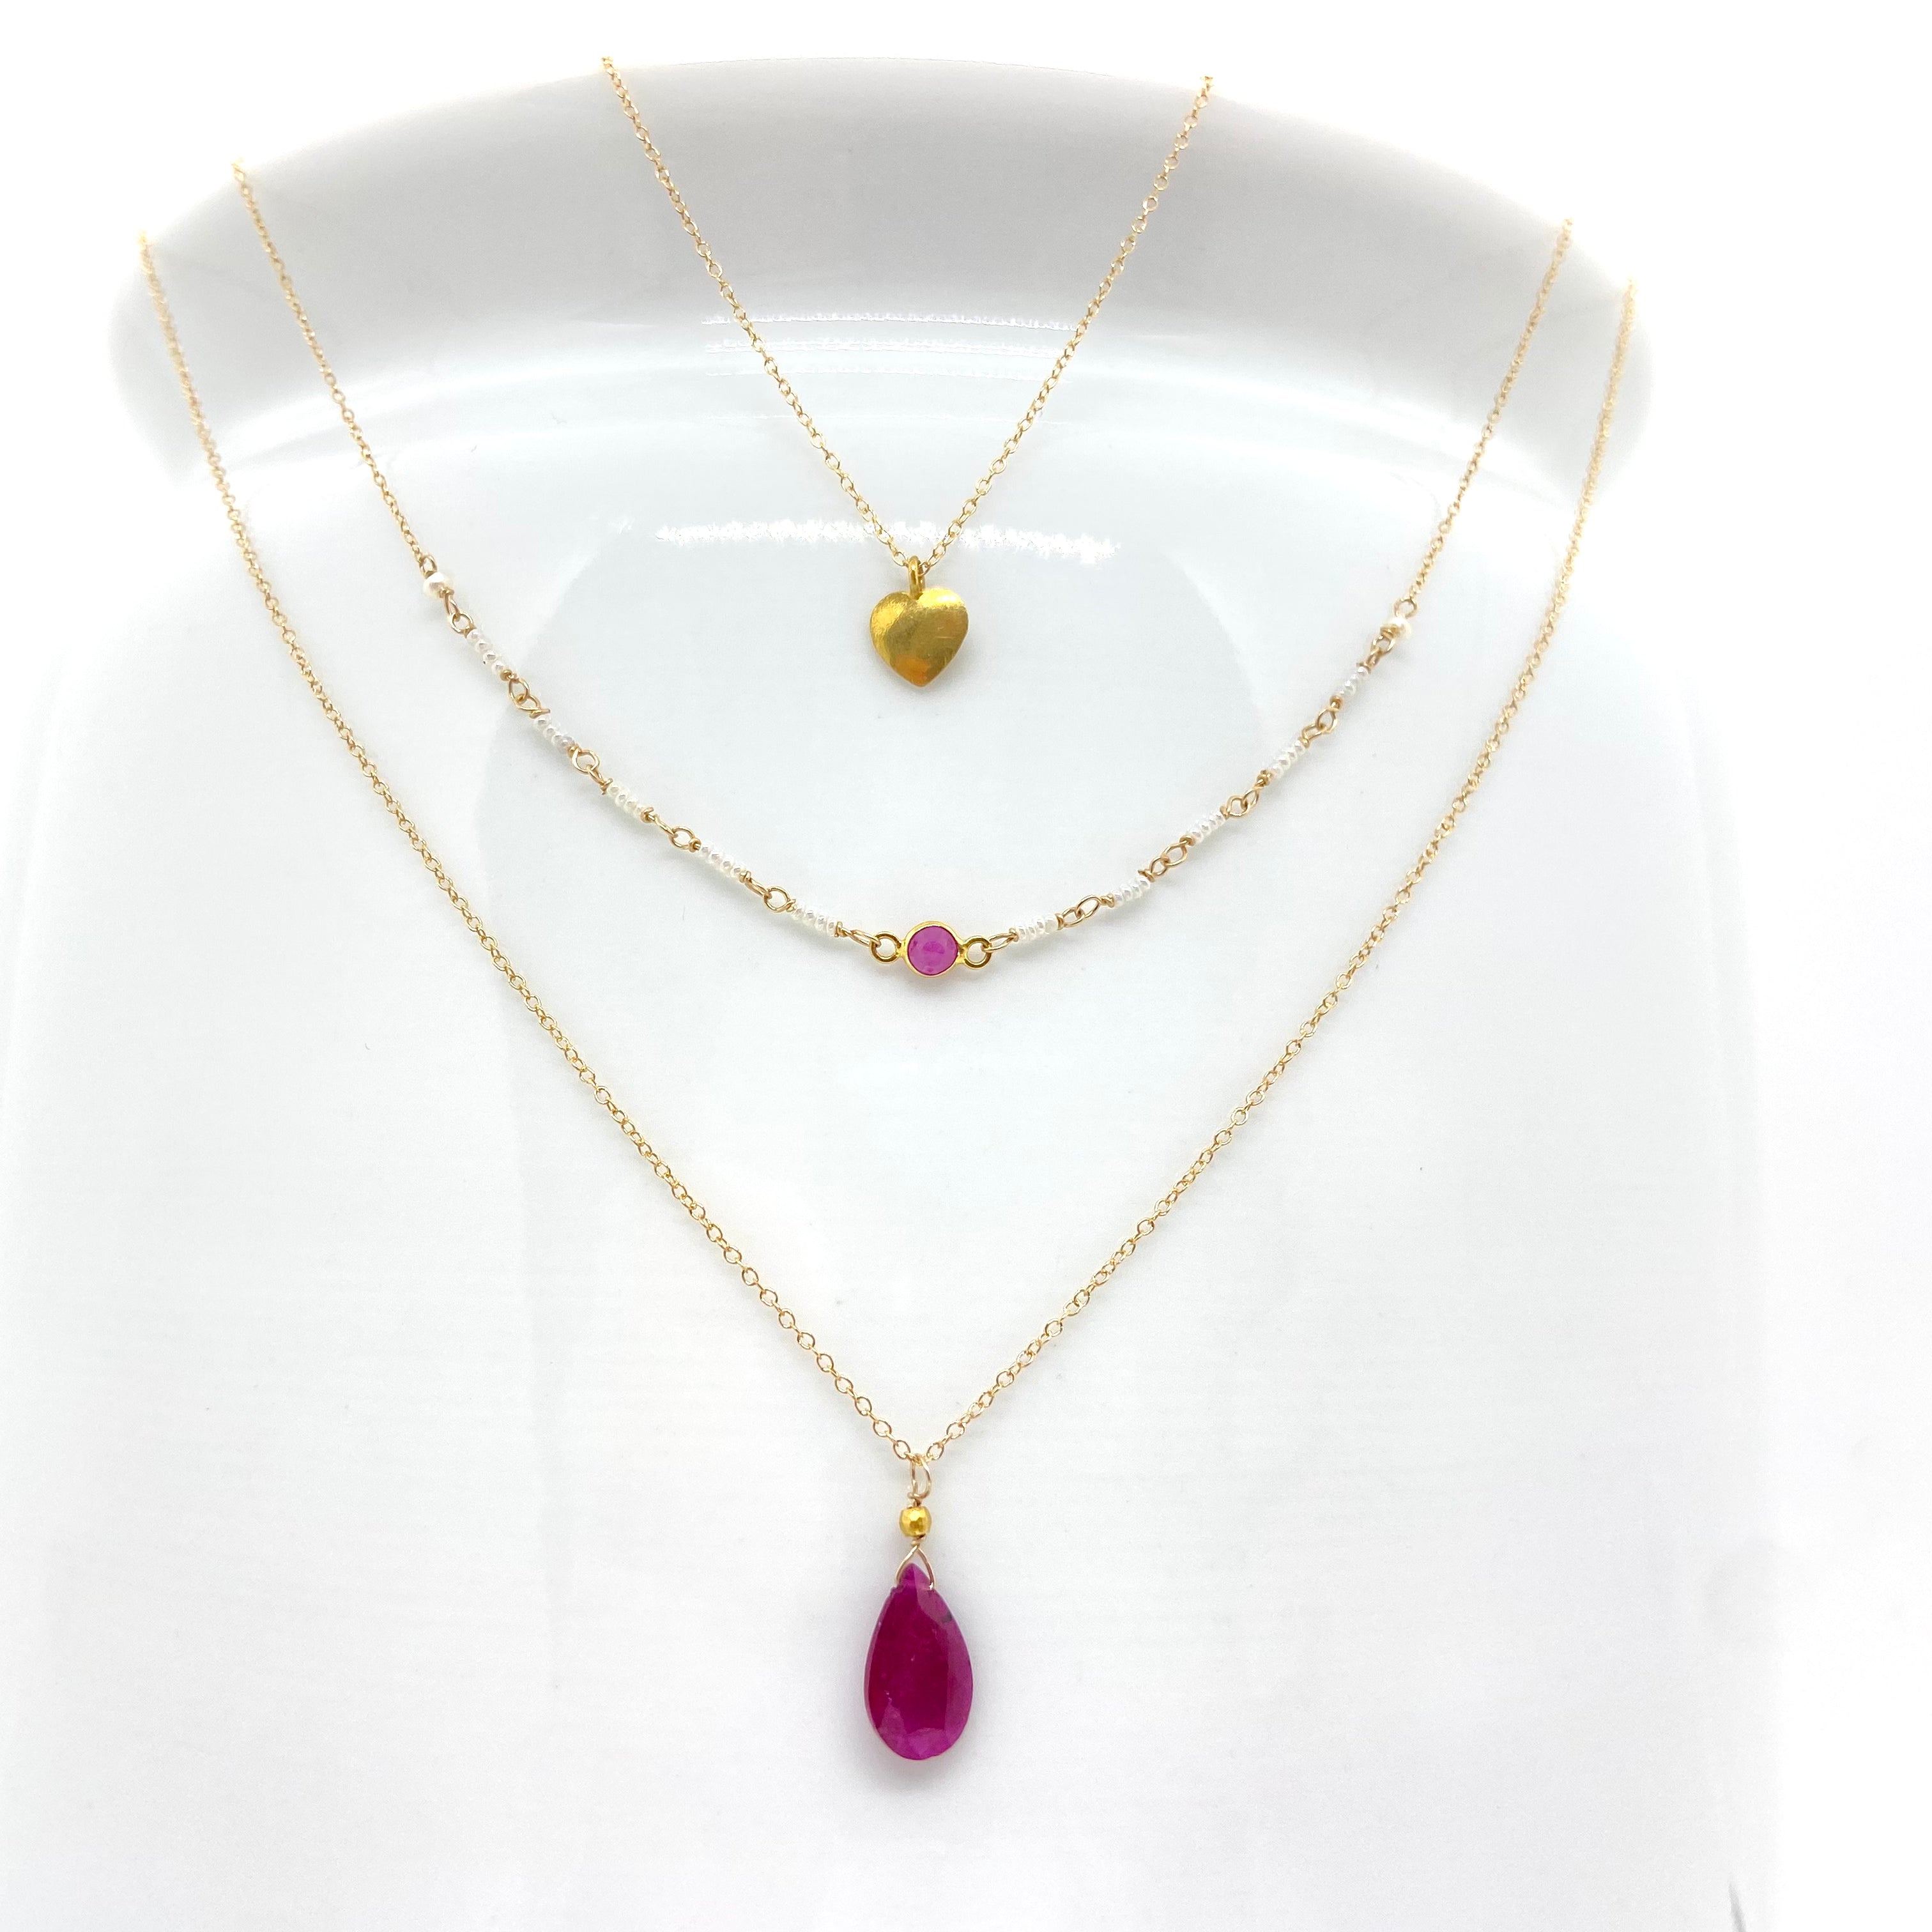 14k Gold Chain Necklace w/ Ruby & 18k Gold Nugget